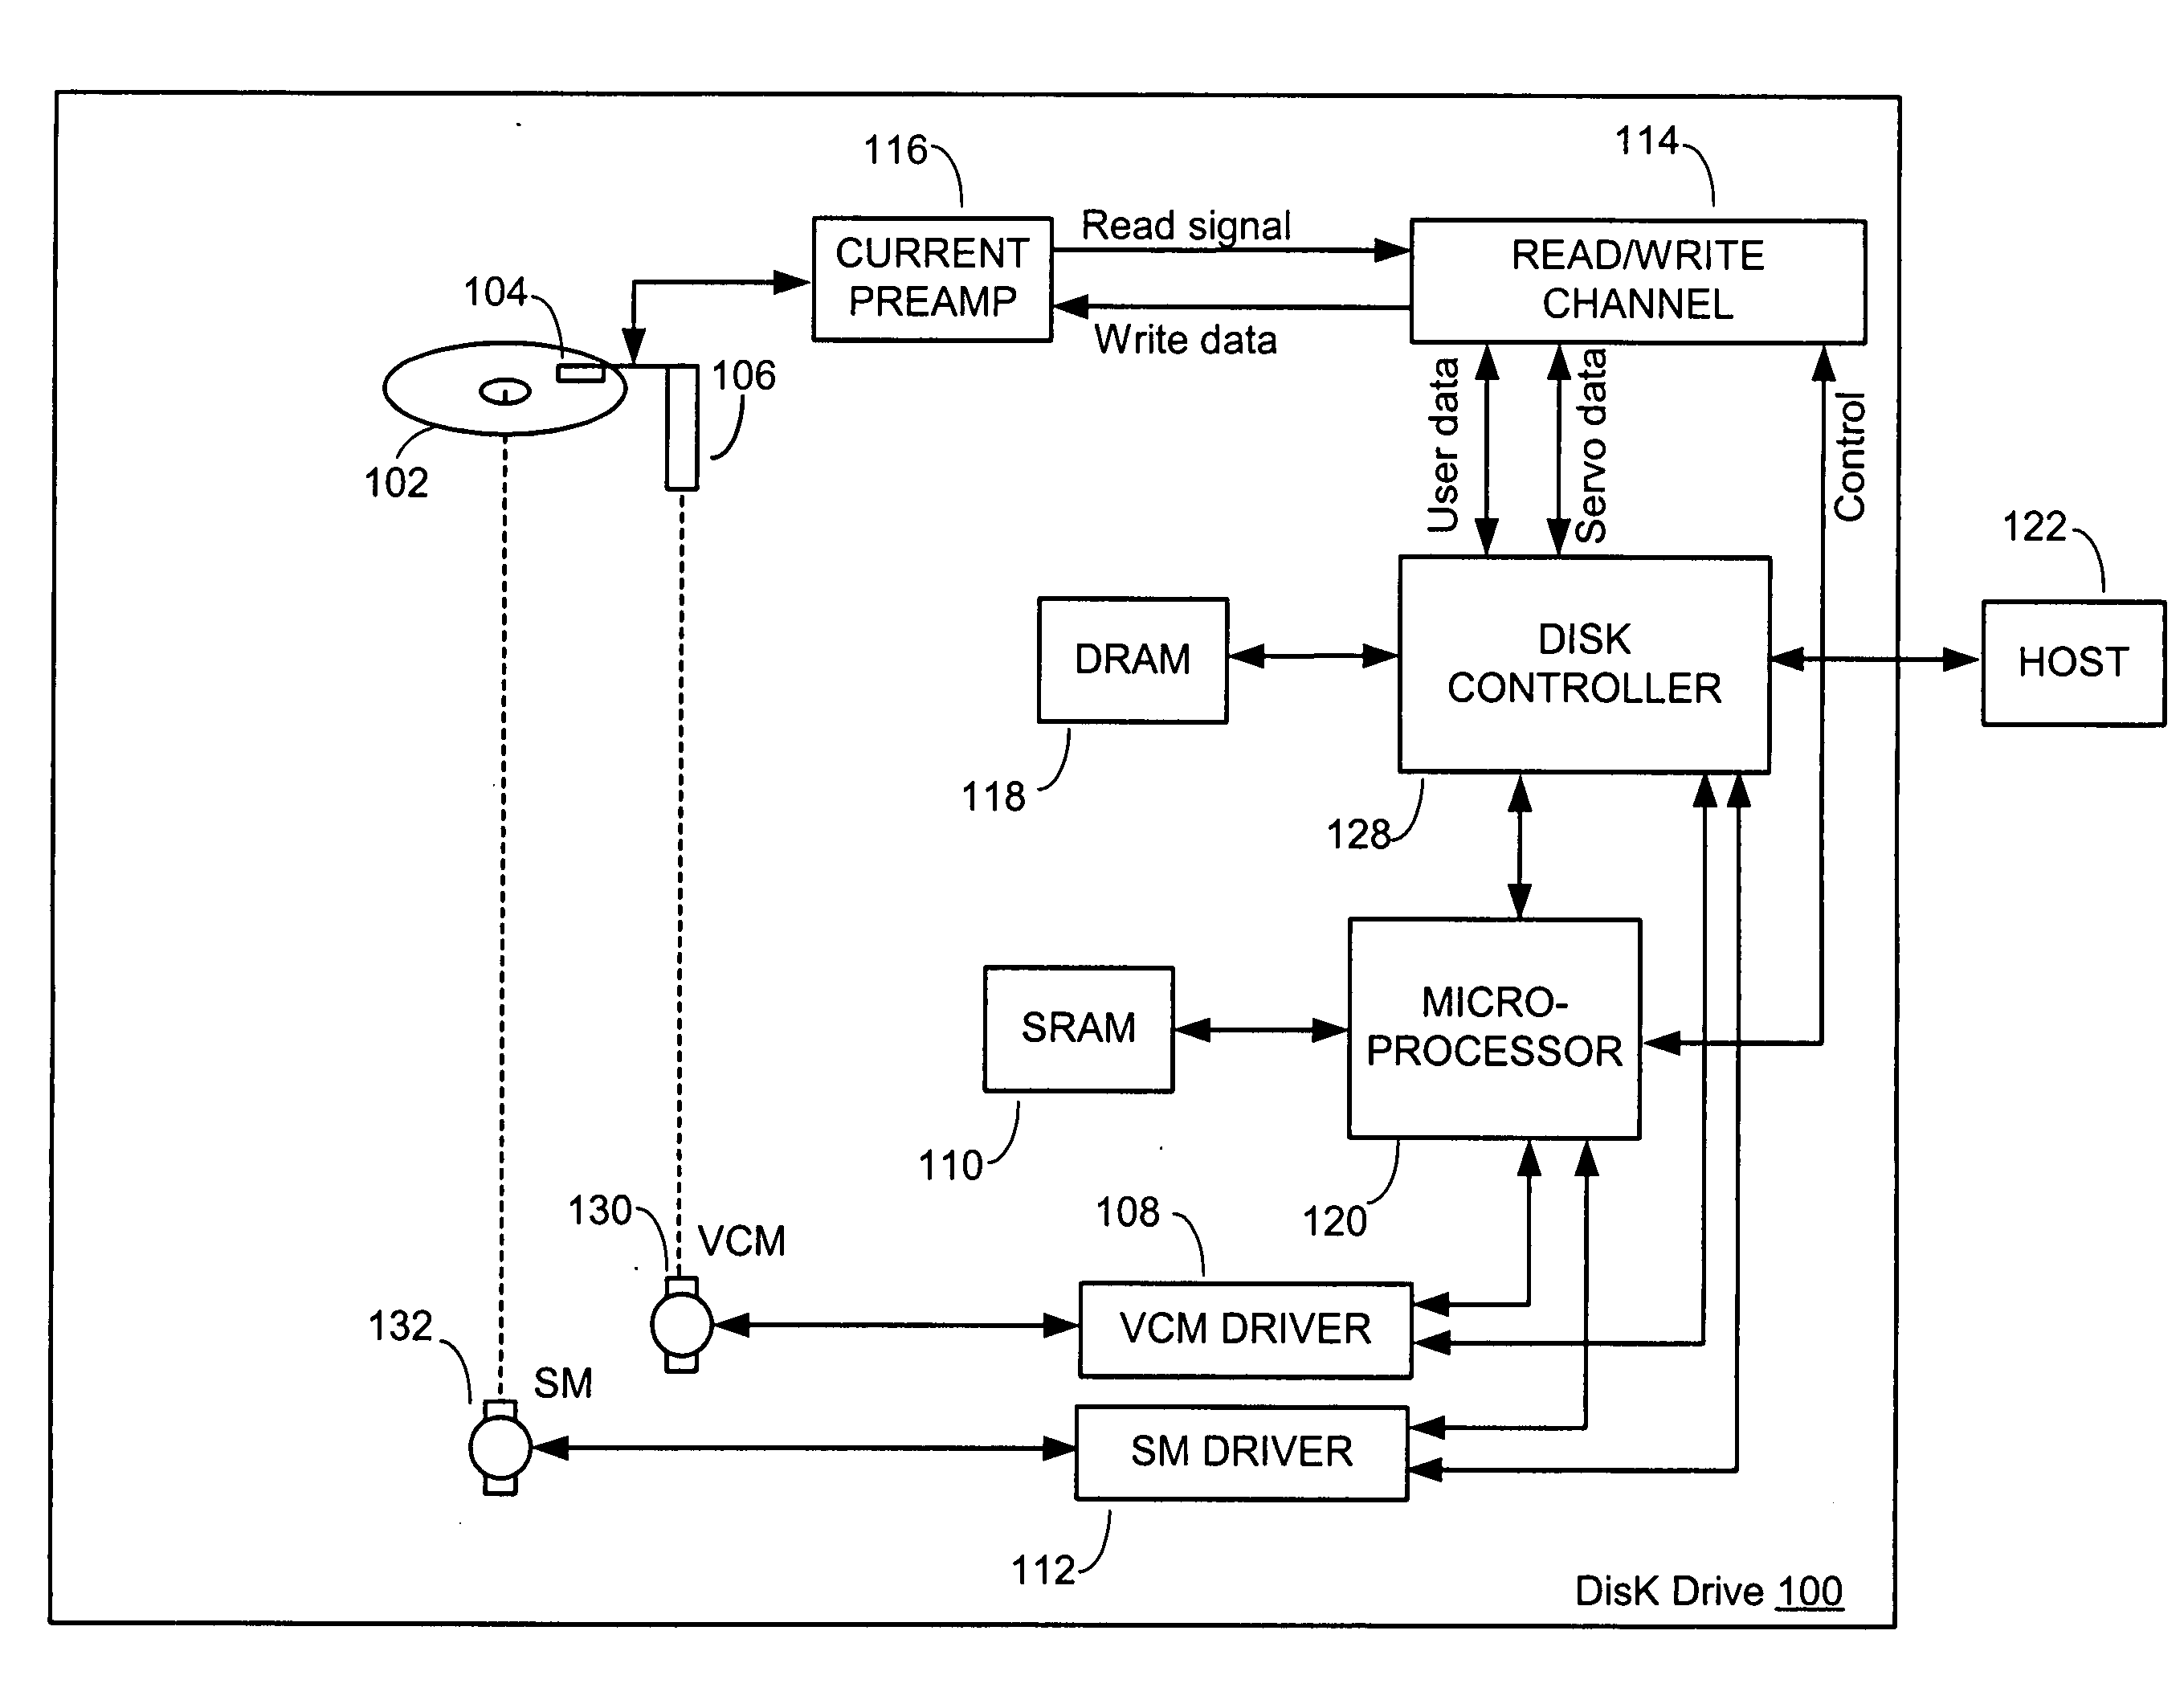 Operating a rotatable media storage device at multiple spin-speeds